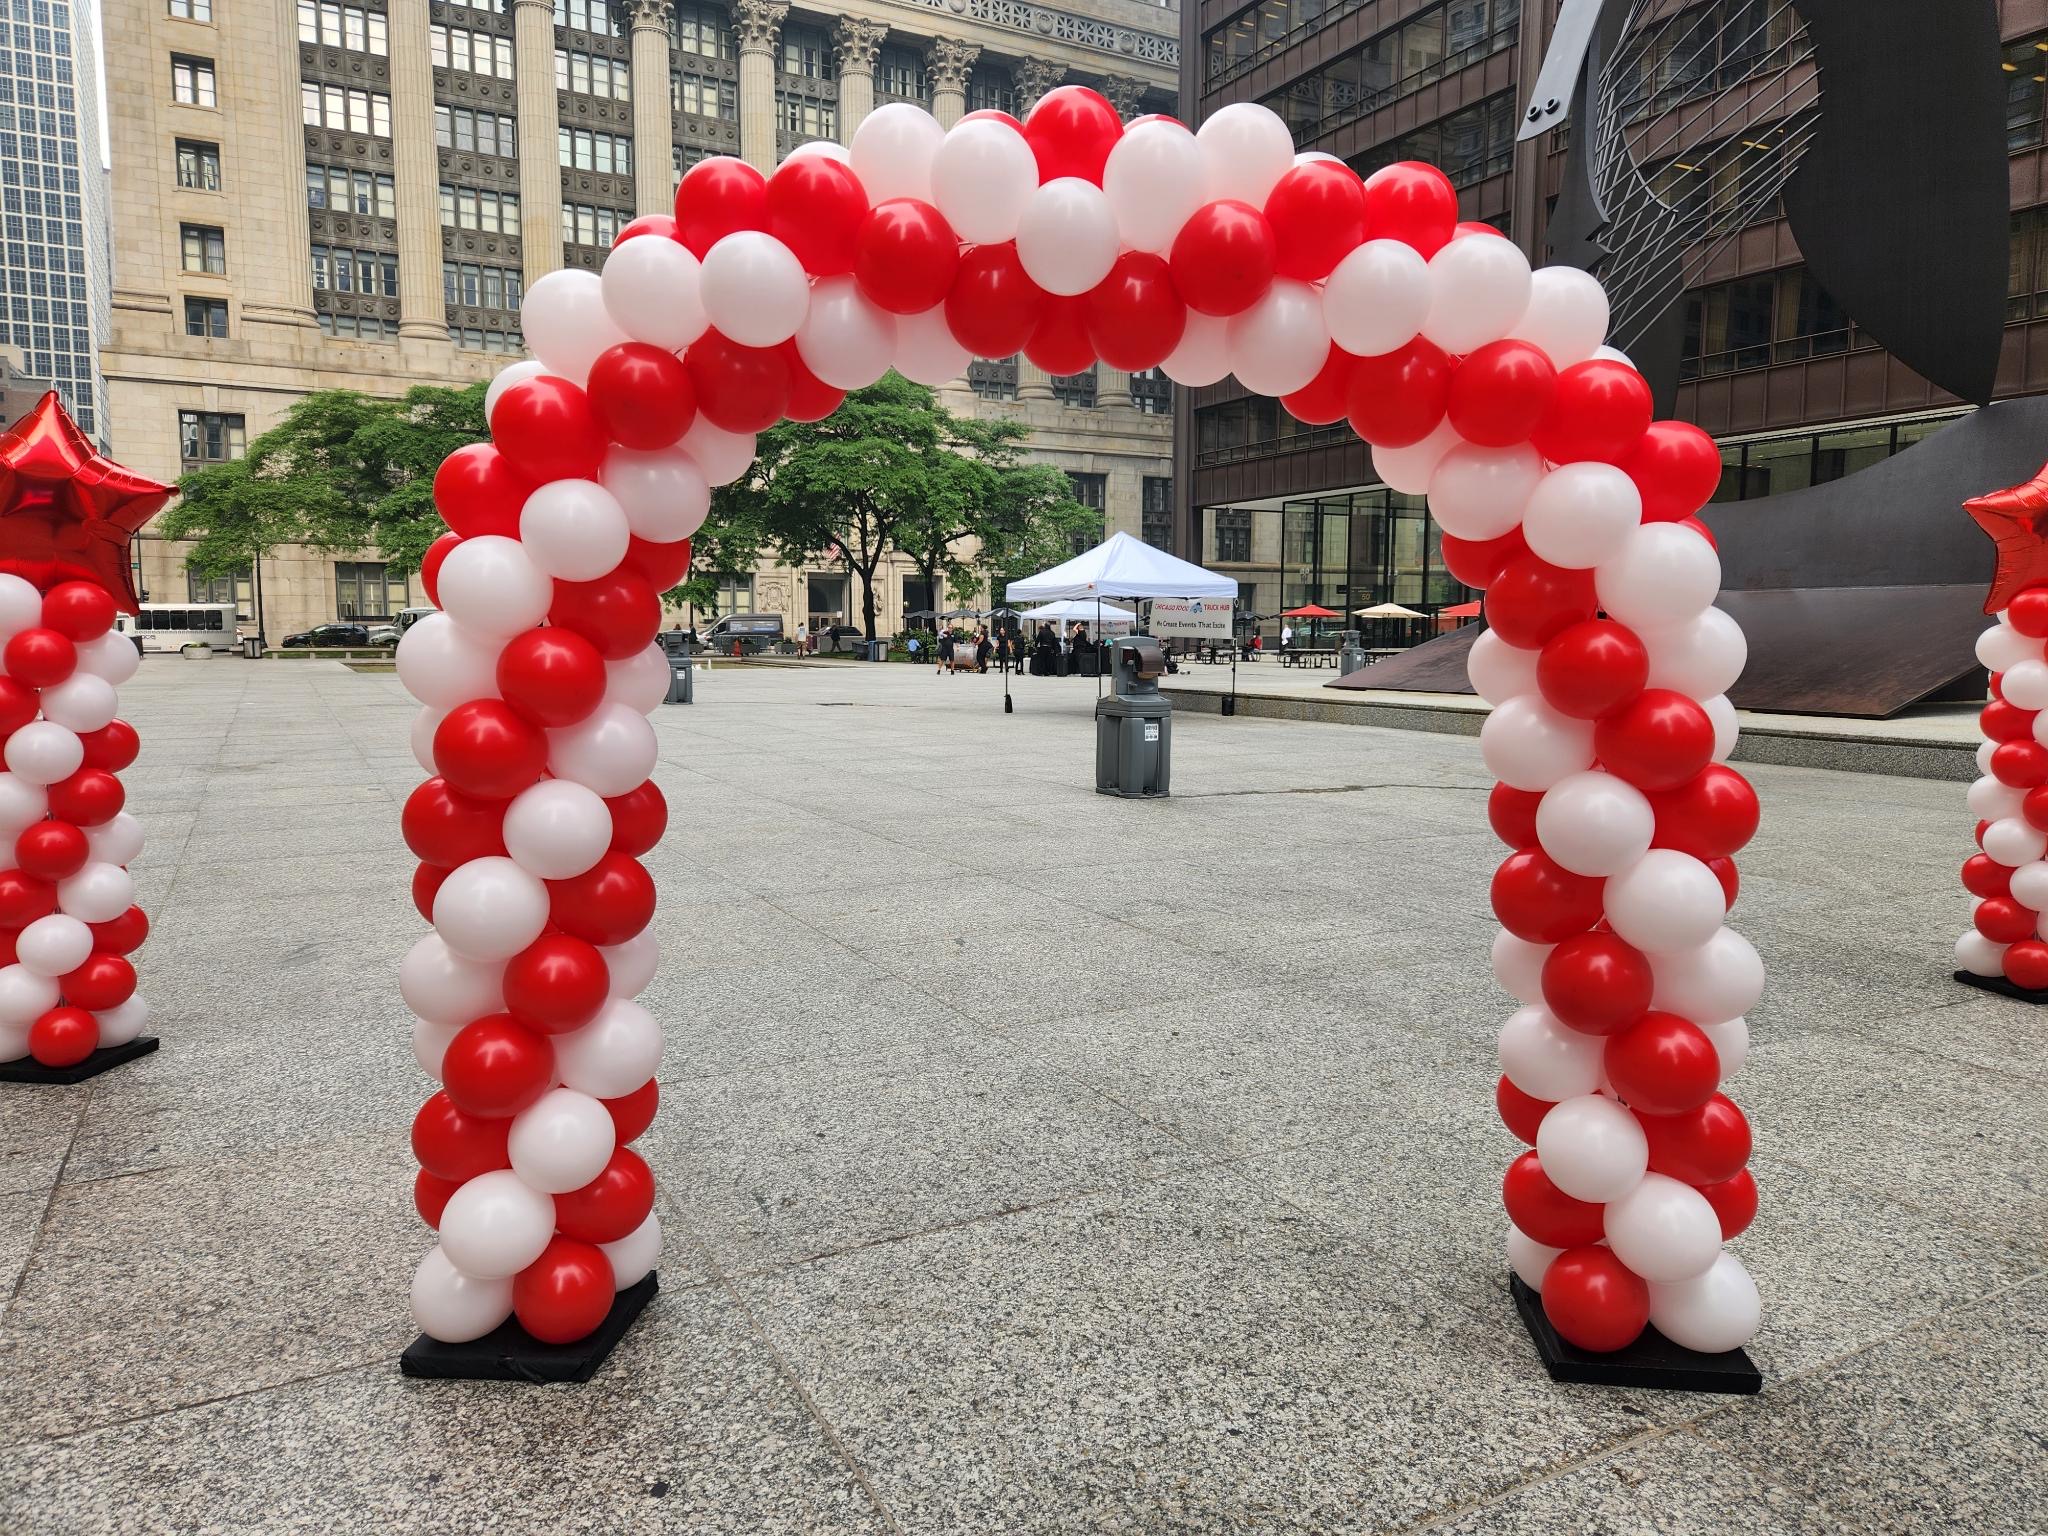 Classic balloon arch in a spiral pattern